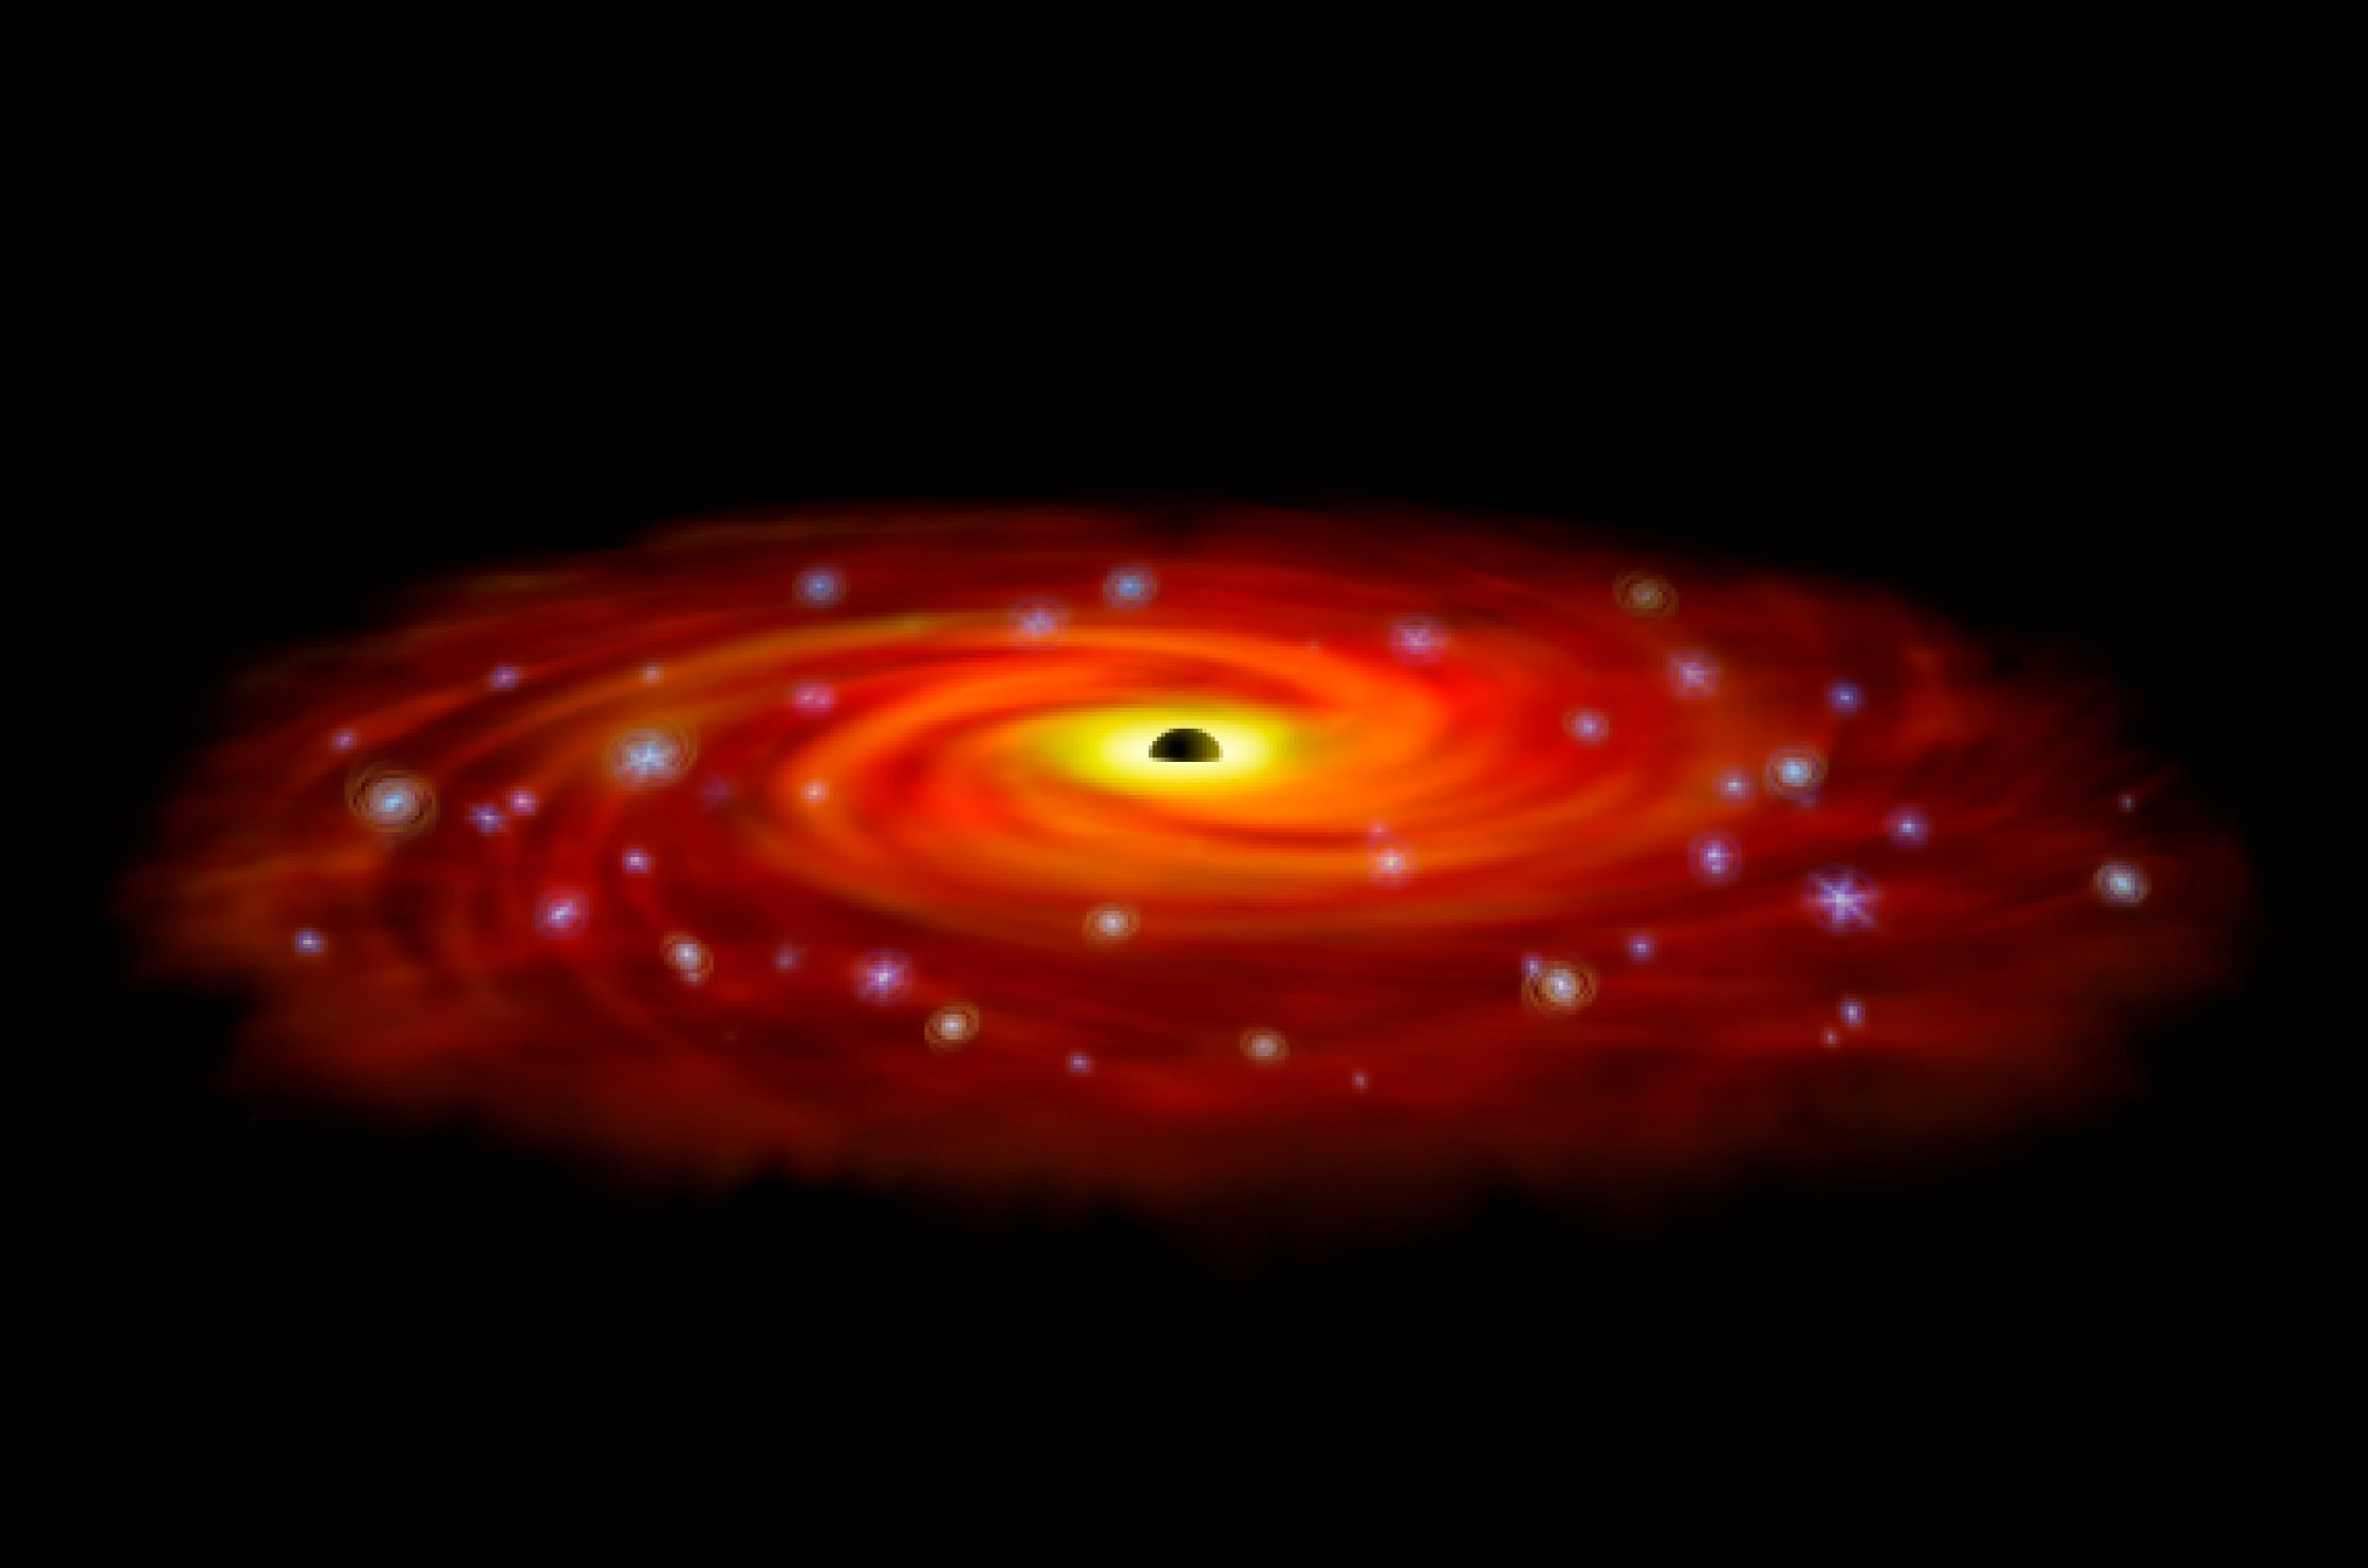 The ring of stars circling Sagittarius A*, the Milky Way's central black hole, shows a combination of infrared and X-ray observations indicating that a surplus of massive stars has formed from a large disk of gas around the black hole in this artist's con